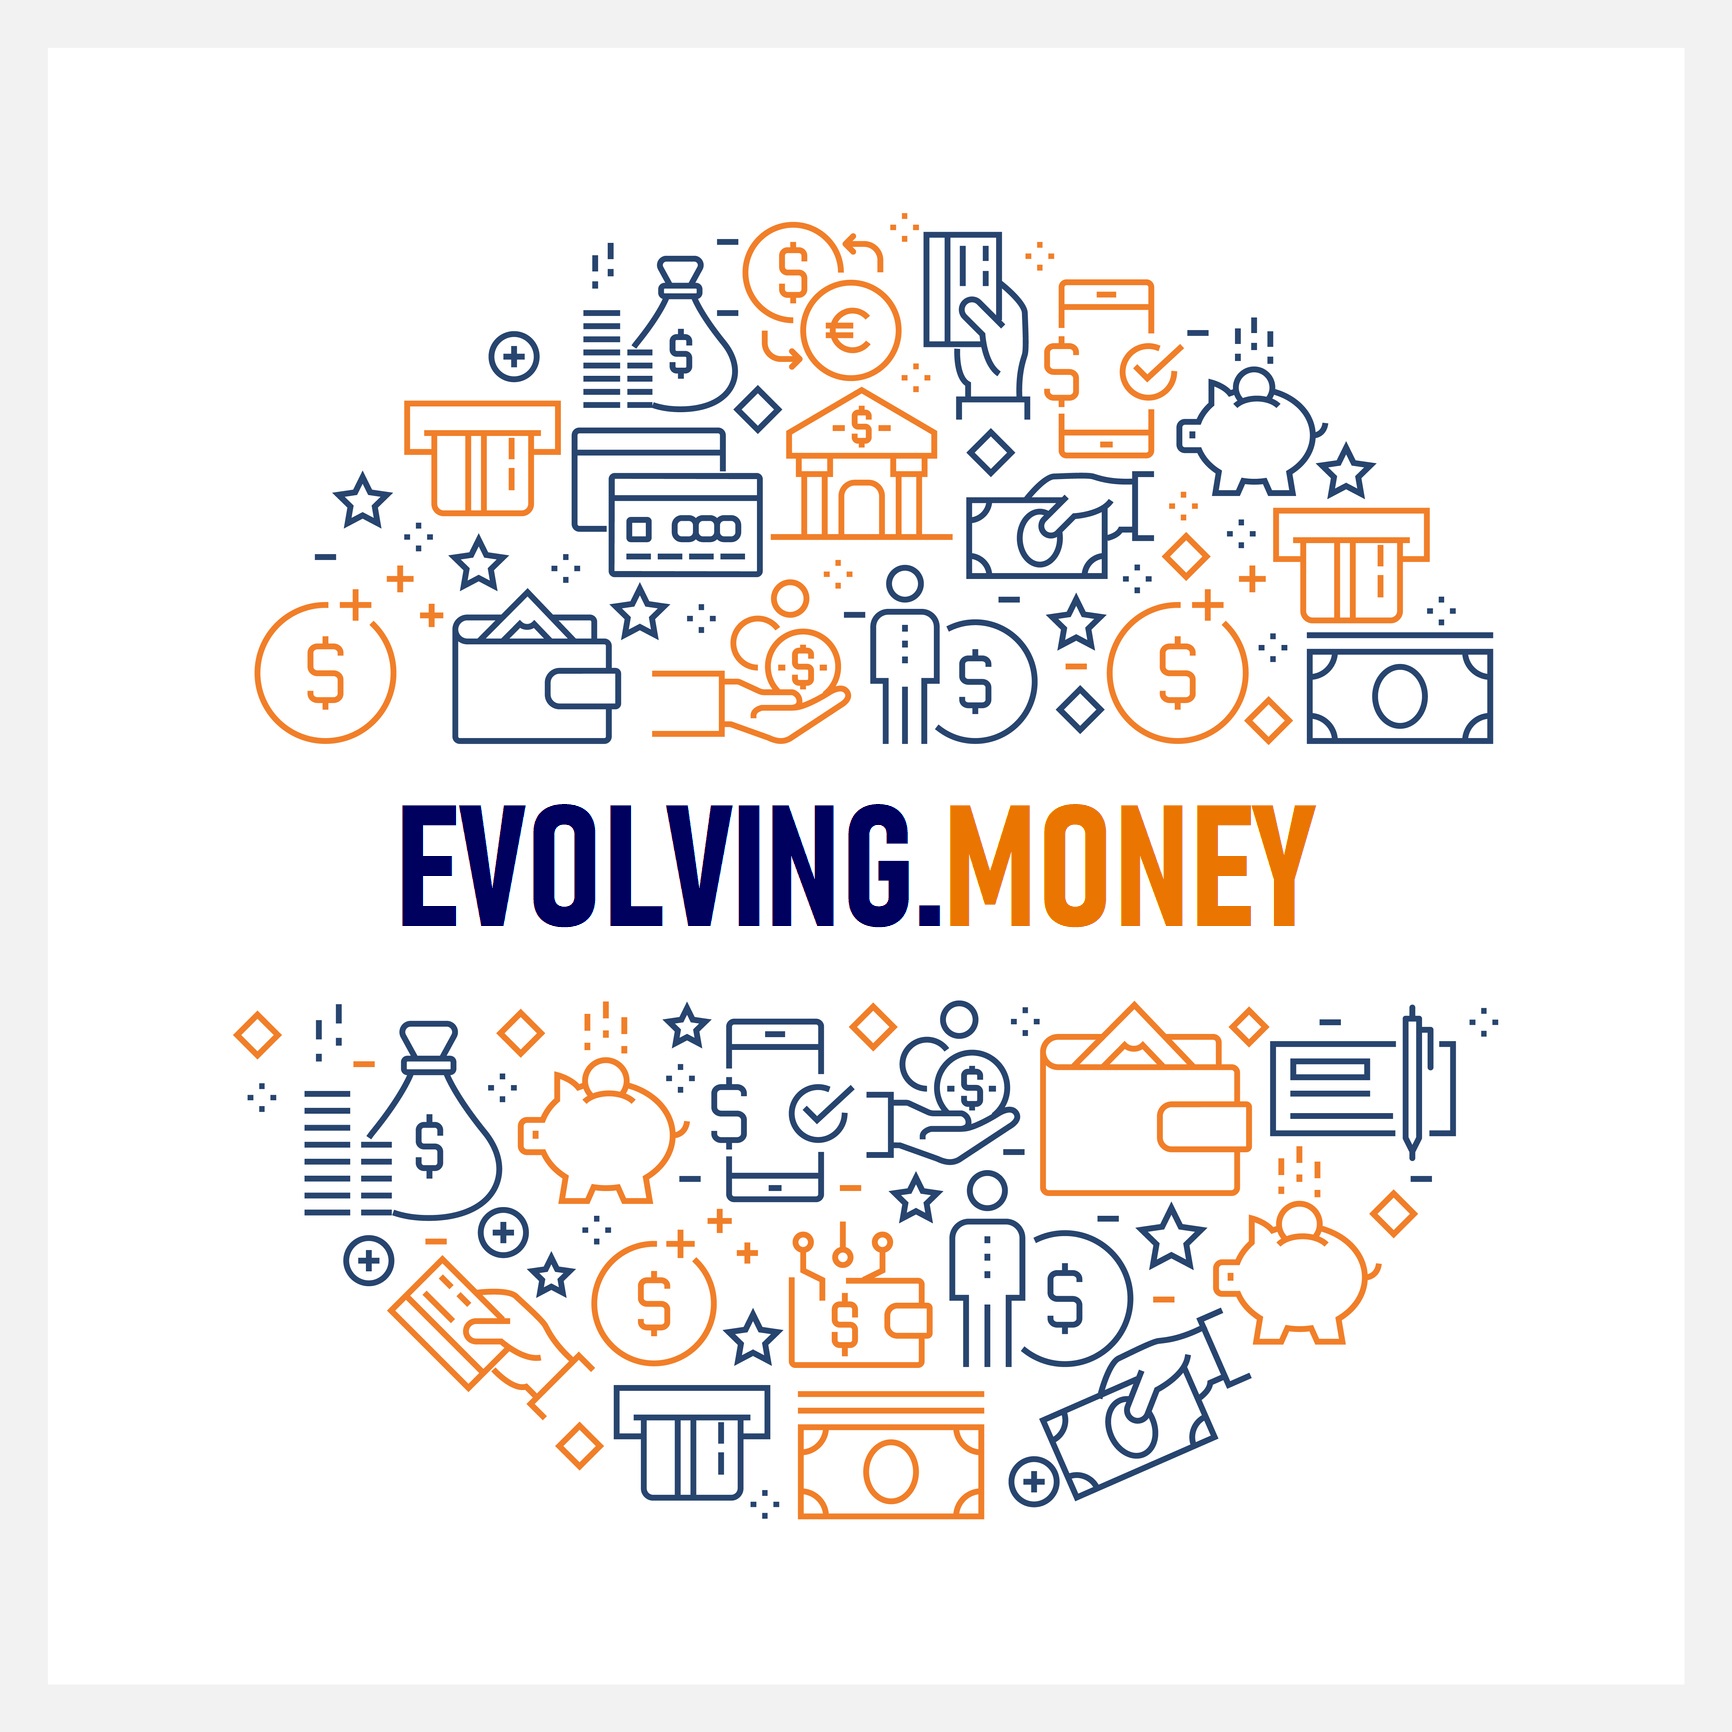 Evolvinmg Money text surrounded by circle of financial symbols